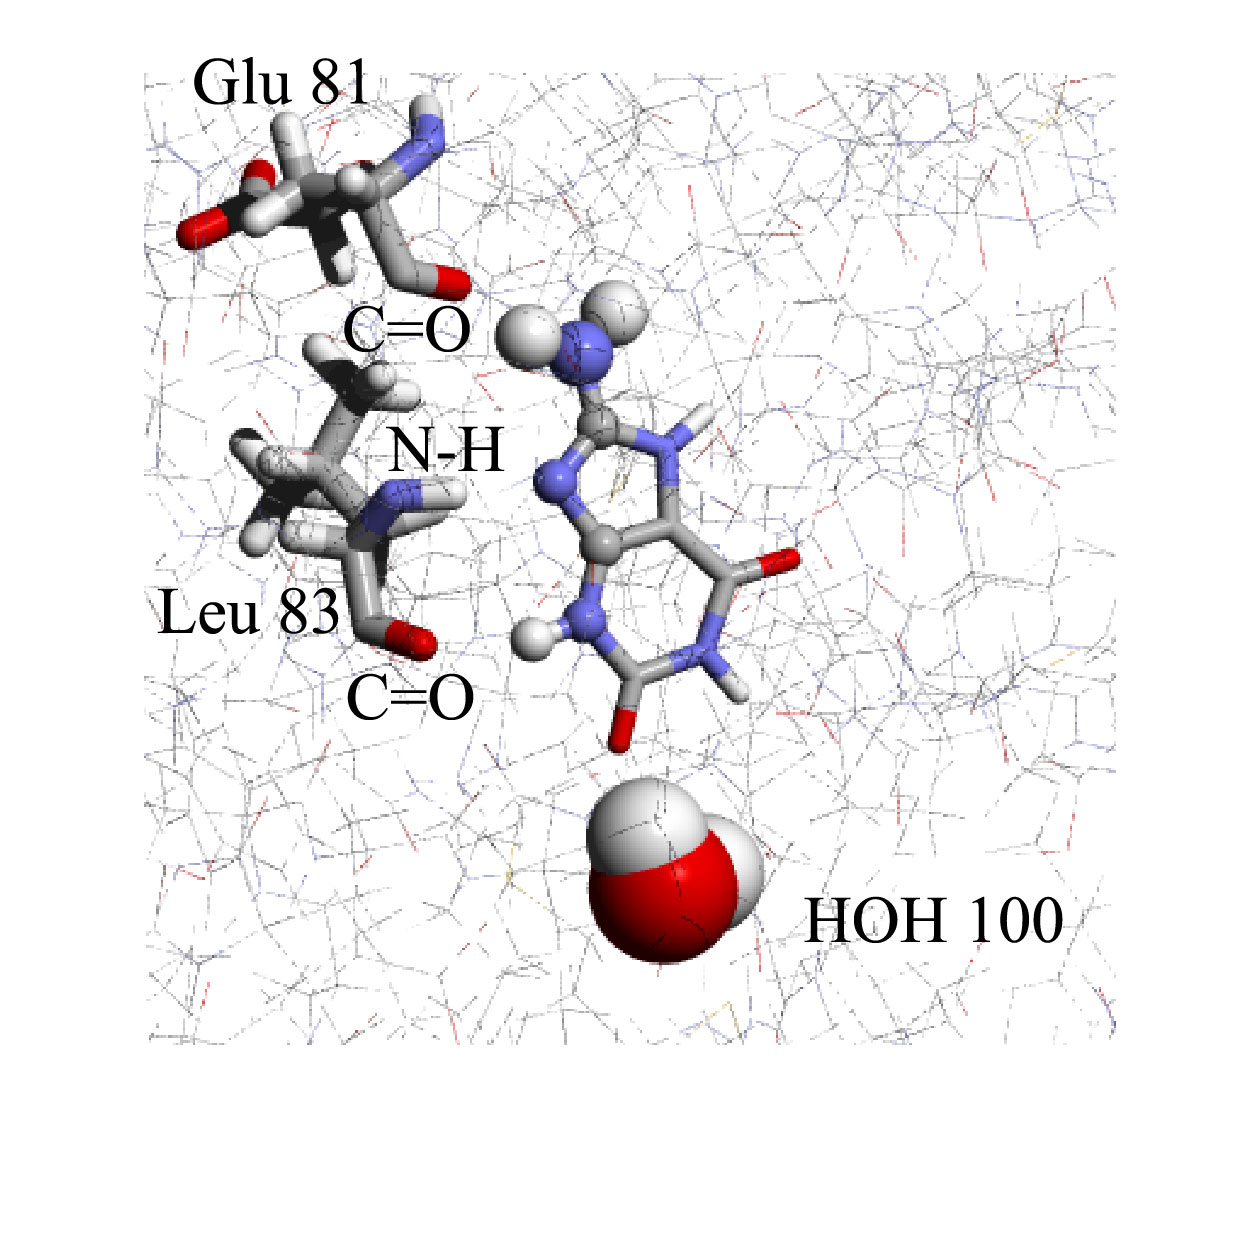 A.T. Garcia-Sosa, R.L. Mancera, The Effect of a Tightly-Bound Water Molecule on Scaffold Diversity in the Computer-Aided de novo Ligand Design of CDK2 Inhibitors, Journal of Molecular Modeling, J. Mol. Model. 2006, Vol. 12, Issue 4, 422-431 CDK2 water drug design de novo discovery ligand Abstract: We have determined the effects that tightly bound water molecules have on the de novo design of cyclin-dependent kinase-2 (CDK2) ligands. 
In particular, we have analyzed the impact of a specific structural water molecule on the chemical diversity and binding mode of ligands generated through a de novo structure-based ligand generation method in the binding site of CDK2. 
The tightly bound water molecule modifies the size and shape of the binding site and we have found that it also imposed constraints on the observed binding modes of the generated ligands. 
This in turn had the indirect effect of reducing the chemical diversity of the underlying molecular scaffolds that were able to bind to the enzyme satisfactorily.
